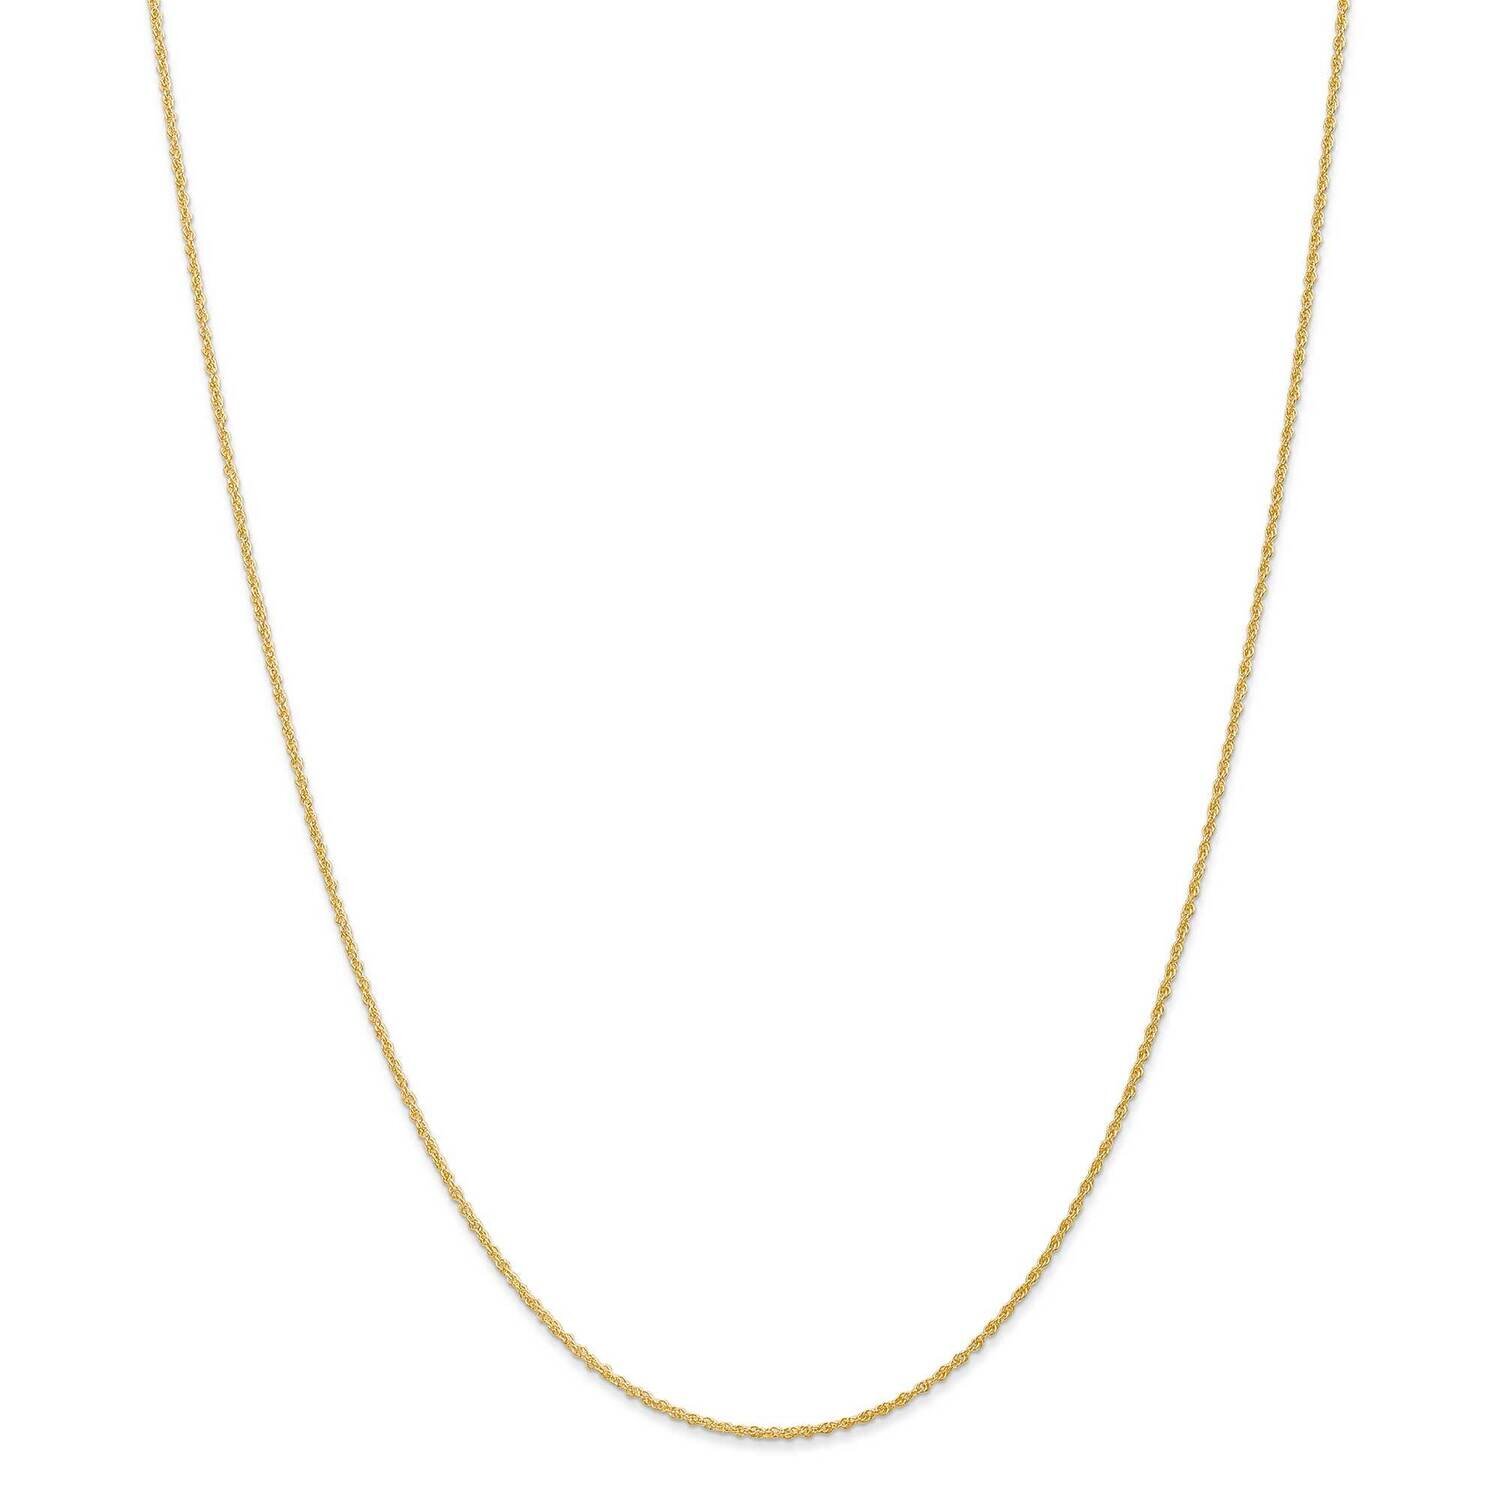 1.1mm Baby Rope Chain 22 Inch 14k Gold PEN173-22